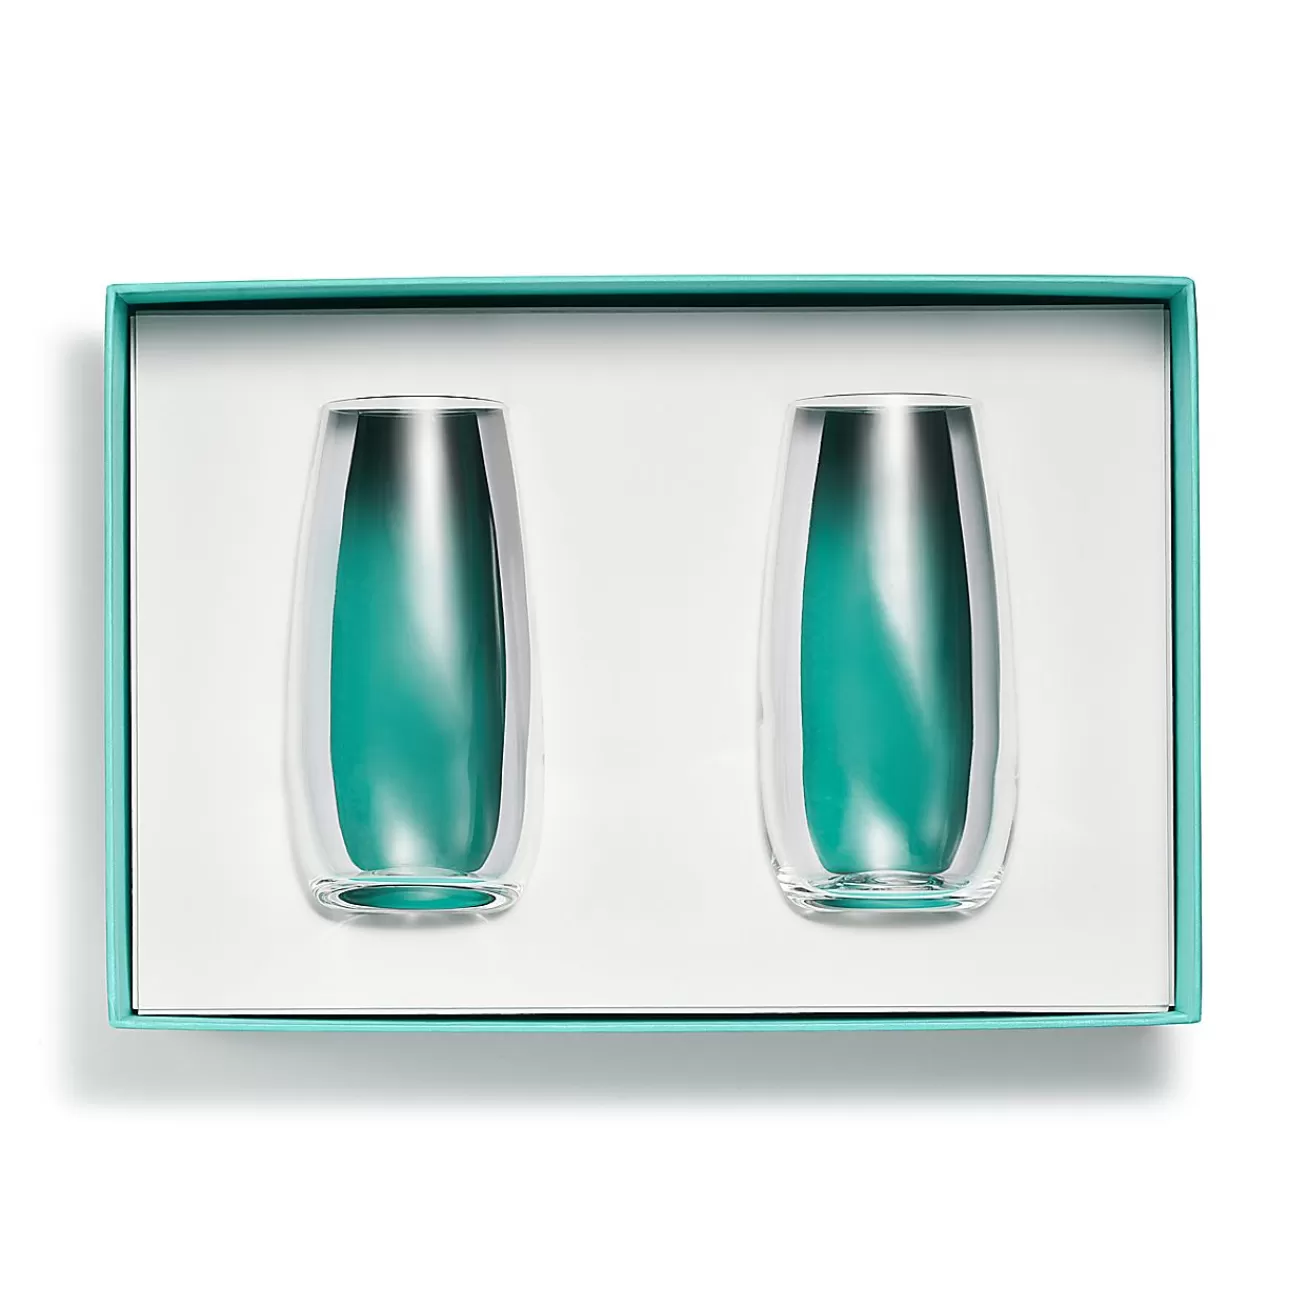 Tiffany & Co. Tiffany Home Essentials Stemless Champagne Flutes in Crystal Glass, Set of Two | ^ The Home | Housewarming Gifts